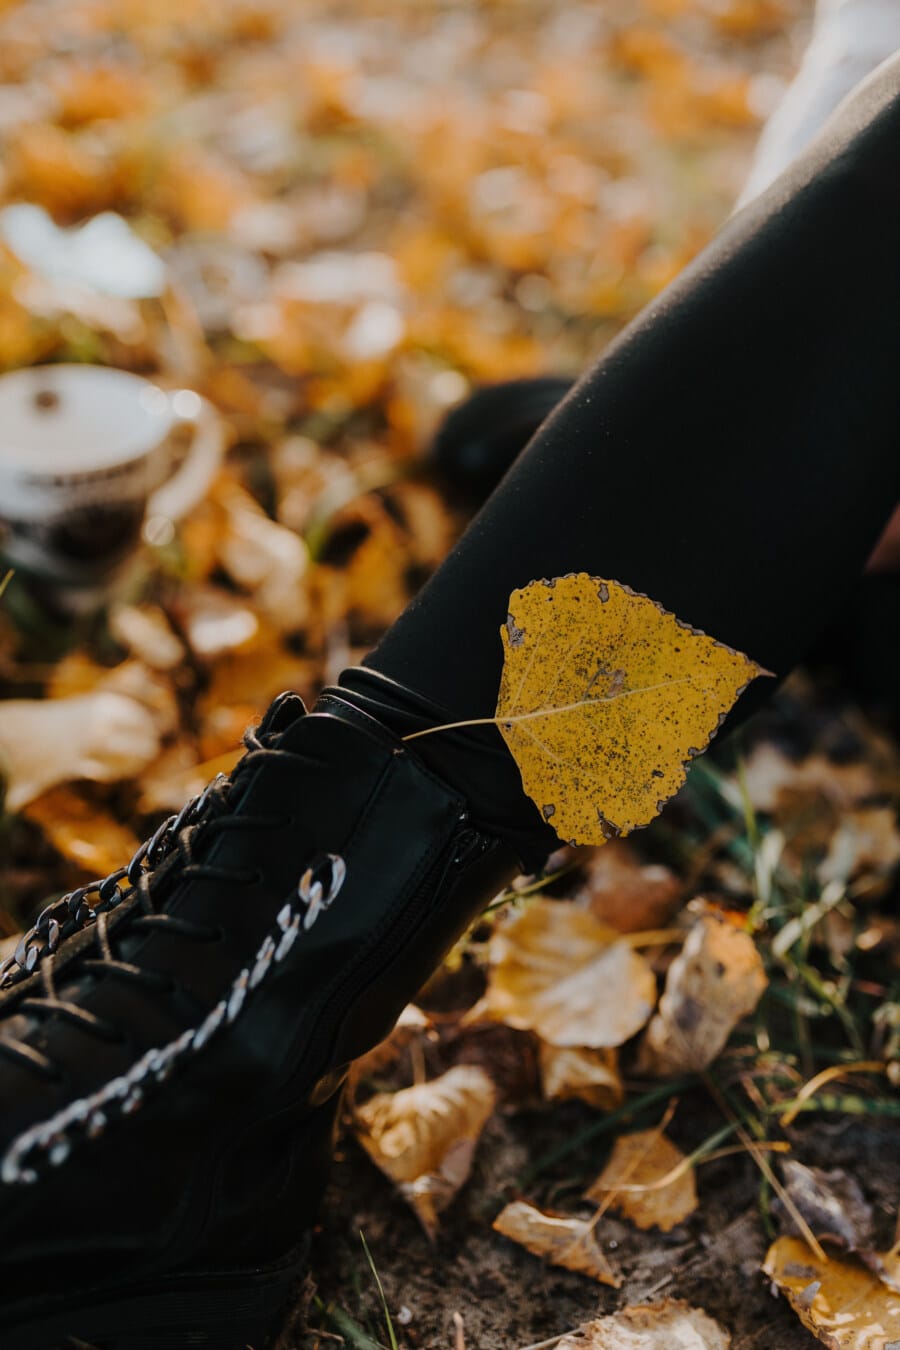 autumn, leather, boot, leaf, nature, foot, outdoors, footwear, shoe, yellow